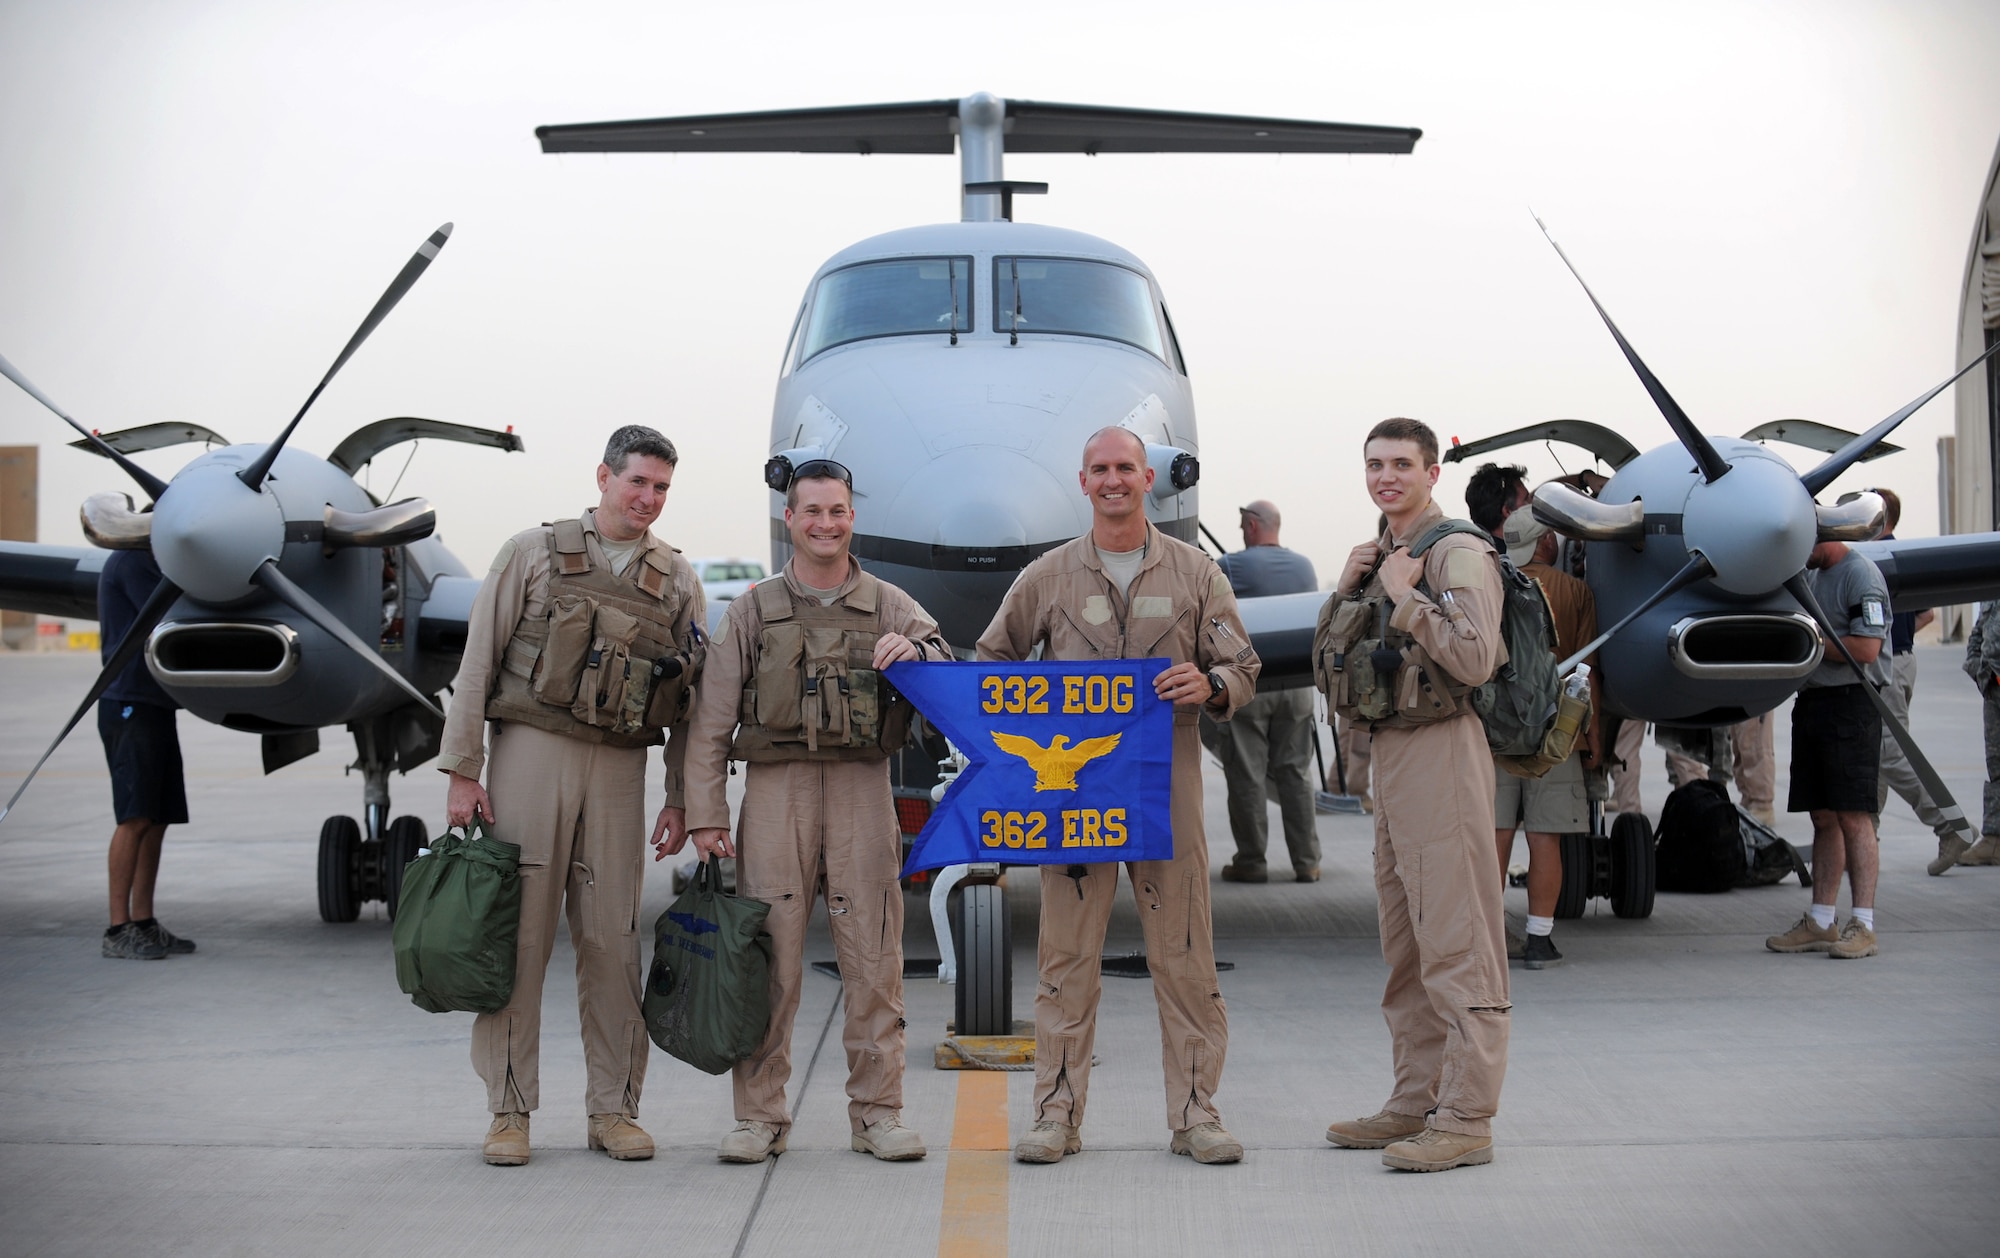 JOINT BASE BALAD, Iraq — From left to right, Senior Master Sgt. Bruce Hunter, Lt. Col. Phillip Stewart, Capt. Jason Goodale and Staff Sgt. Shaun Nelson, all from the 362nd Expeditionary Reconnaissance Squadron, pose in front of an MC-12 Liberty aircraft here at approximately 6:45 p.m. local time June 10 after the aircraft's first combat sortie. The Air Force's newest ISR platform, the MC-12 provides real-time intelligence, surveillance and reconnaissance capability in direct support of Coalition and joint ground forces. Sergeant Hunter is deployed here from Tinker Air Force Base, Okla., and is from Lenox, S.D., Colonel Stewart is deployed here from Langley Air Force Base, Va., and is a native of Silver Spring, Md. Captain Goodale is deployed here from Travis Air Force Base, Calif., and is from Sioux Falls, S.D. Sergeant Nelson is deployed here from Offutt Air Force Base, Neb., and is a native of Rock Springs, Wyo. (U.S. Air Force photo/Senior Airman Elizabeth Rissmiller)